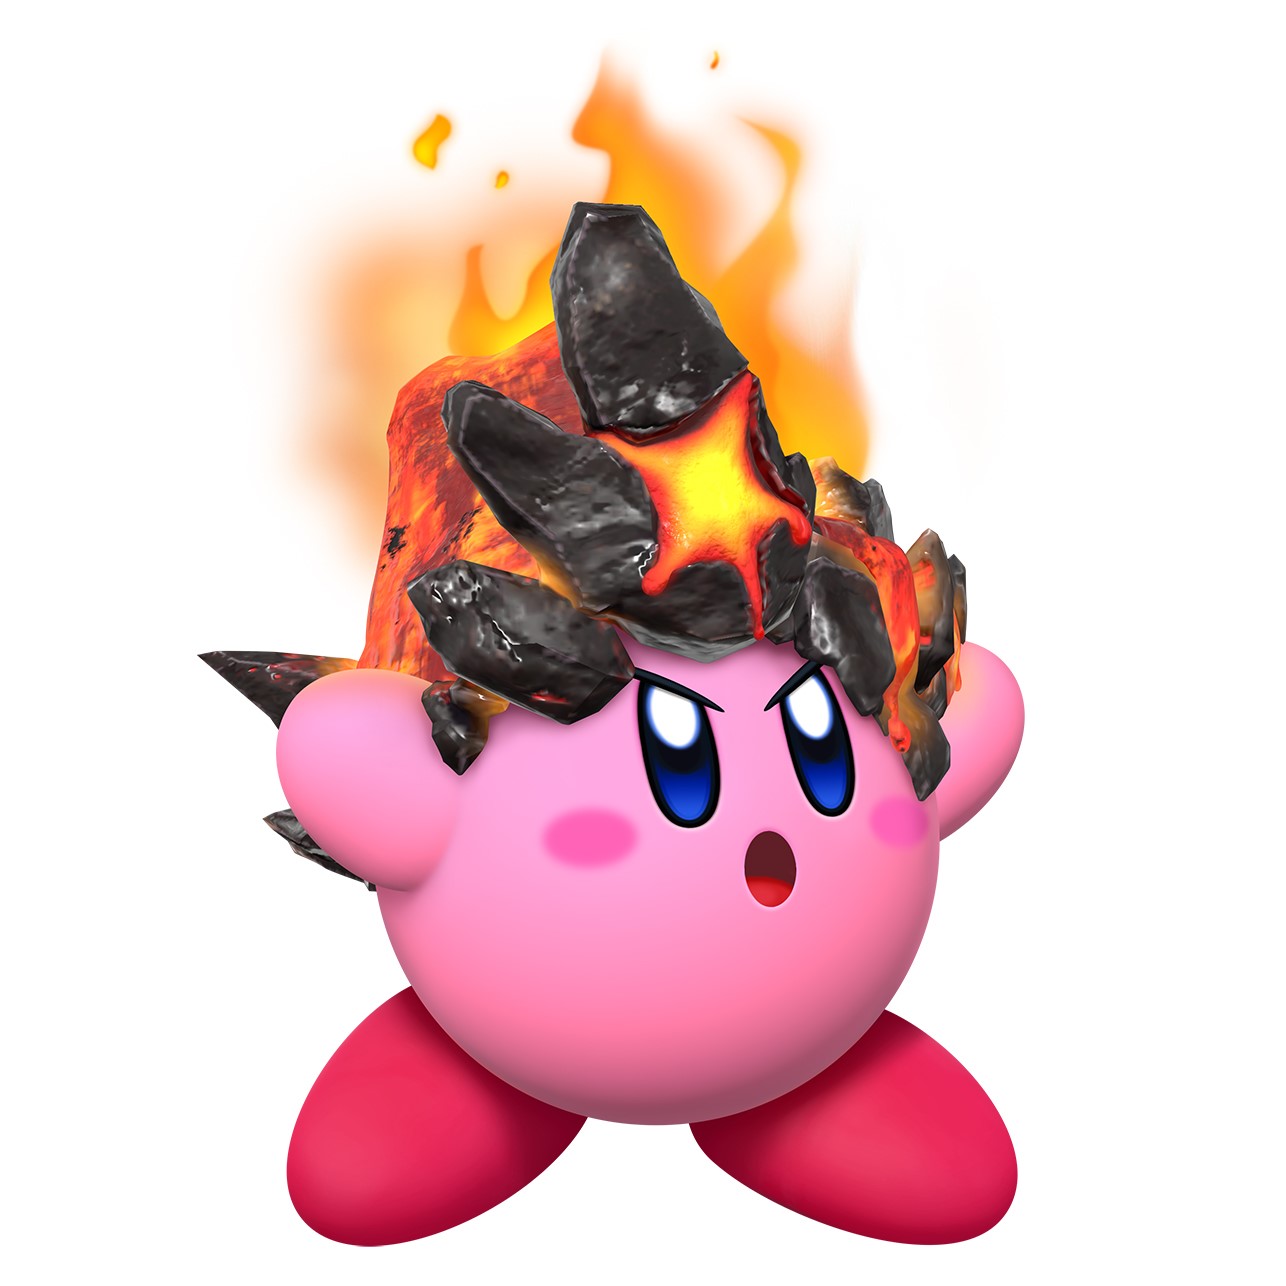 Kirby and the Forgotten Land screenshots - Image #30879